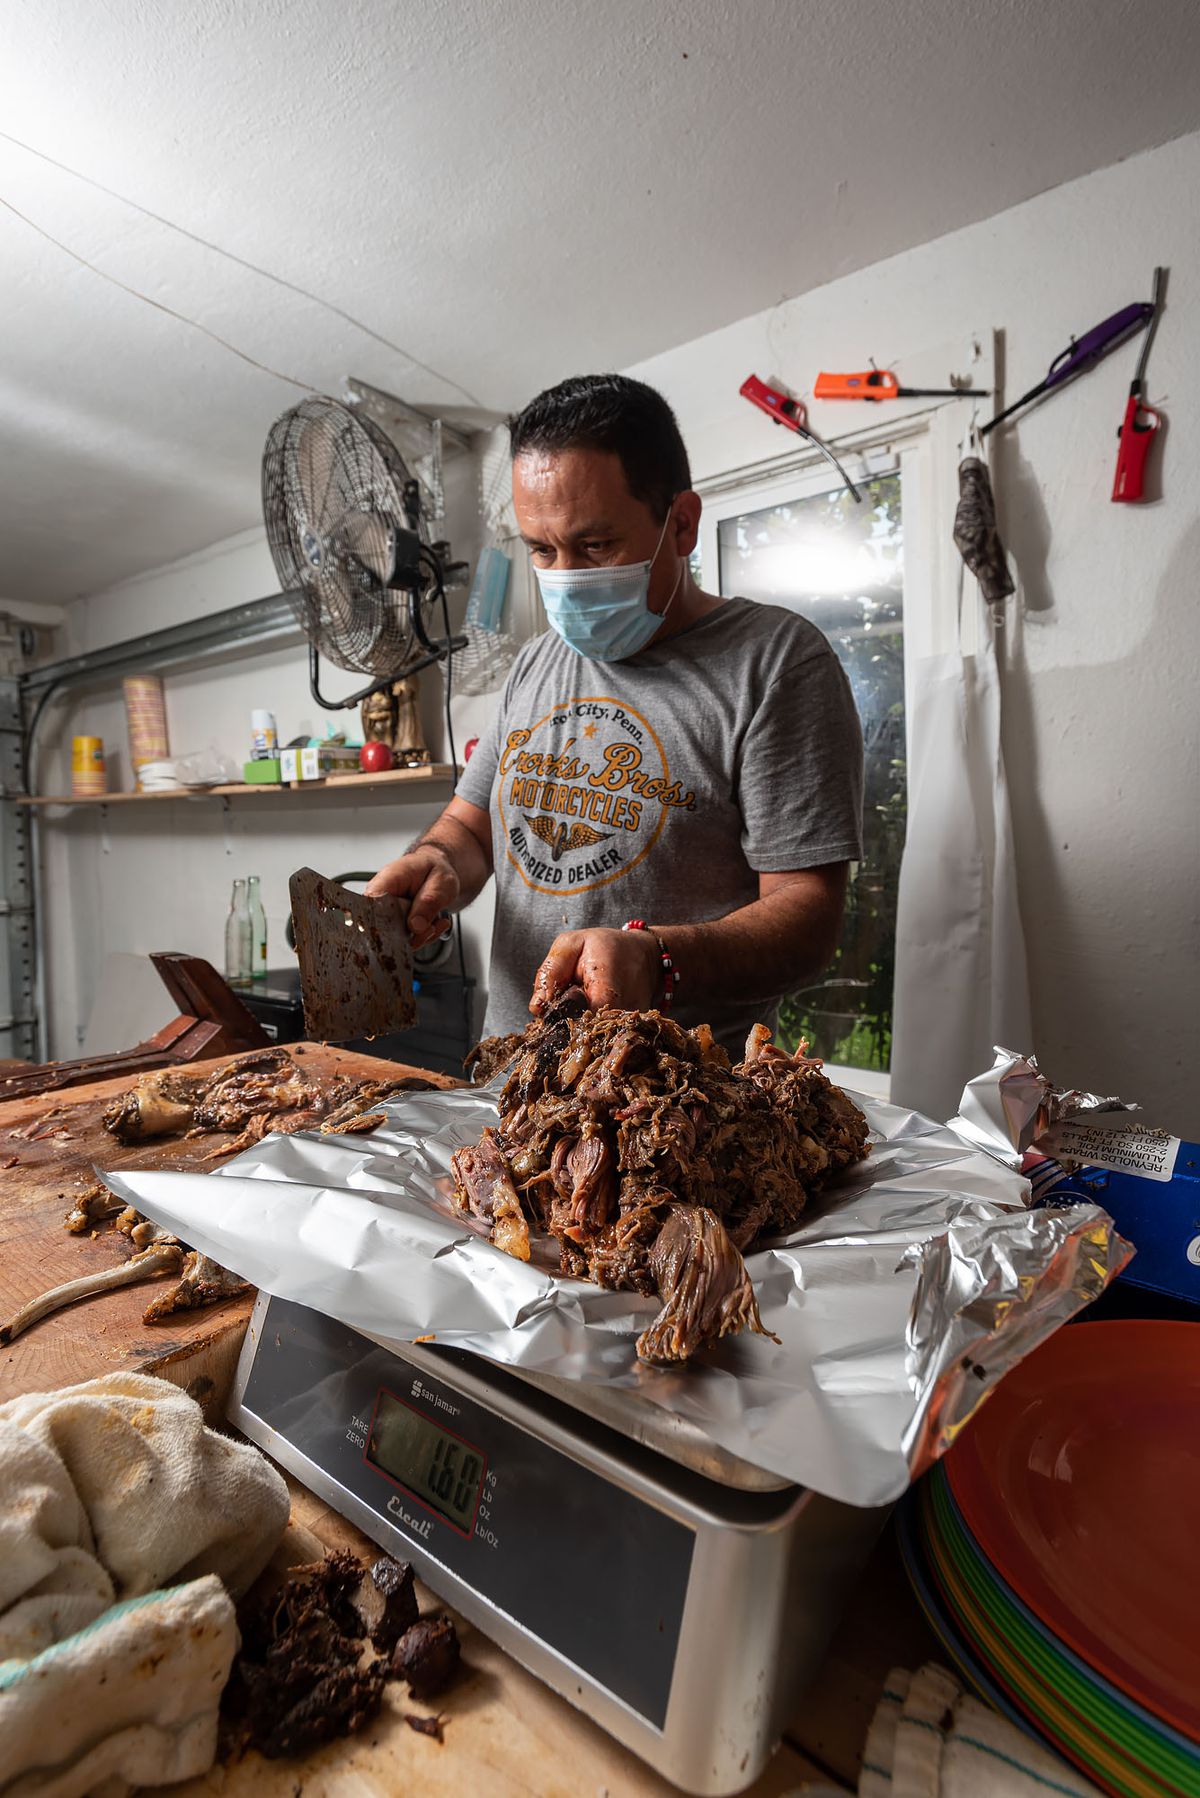 Ramon Coss weighs the barbacoa on a scale.